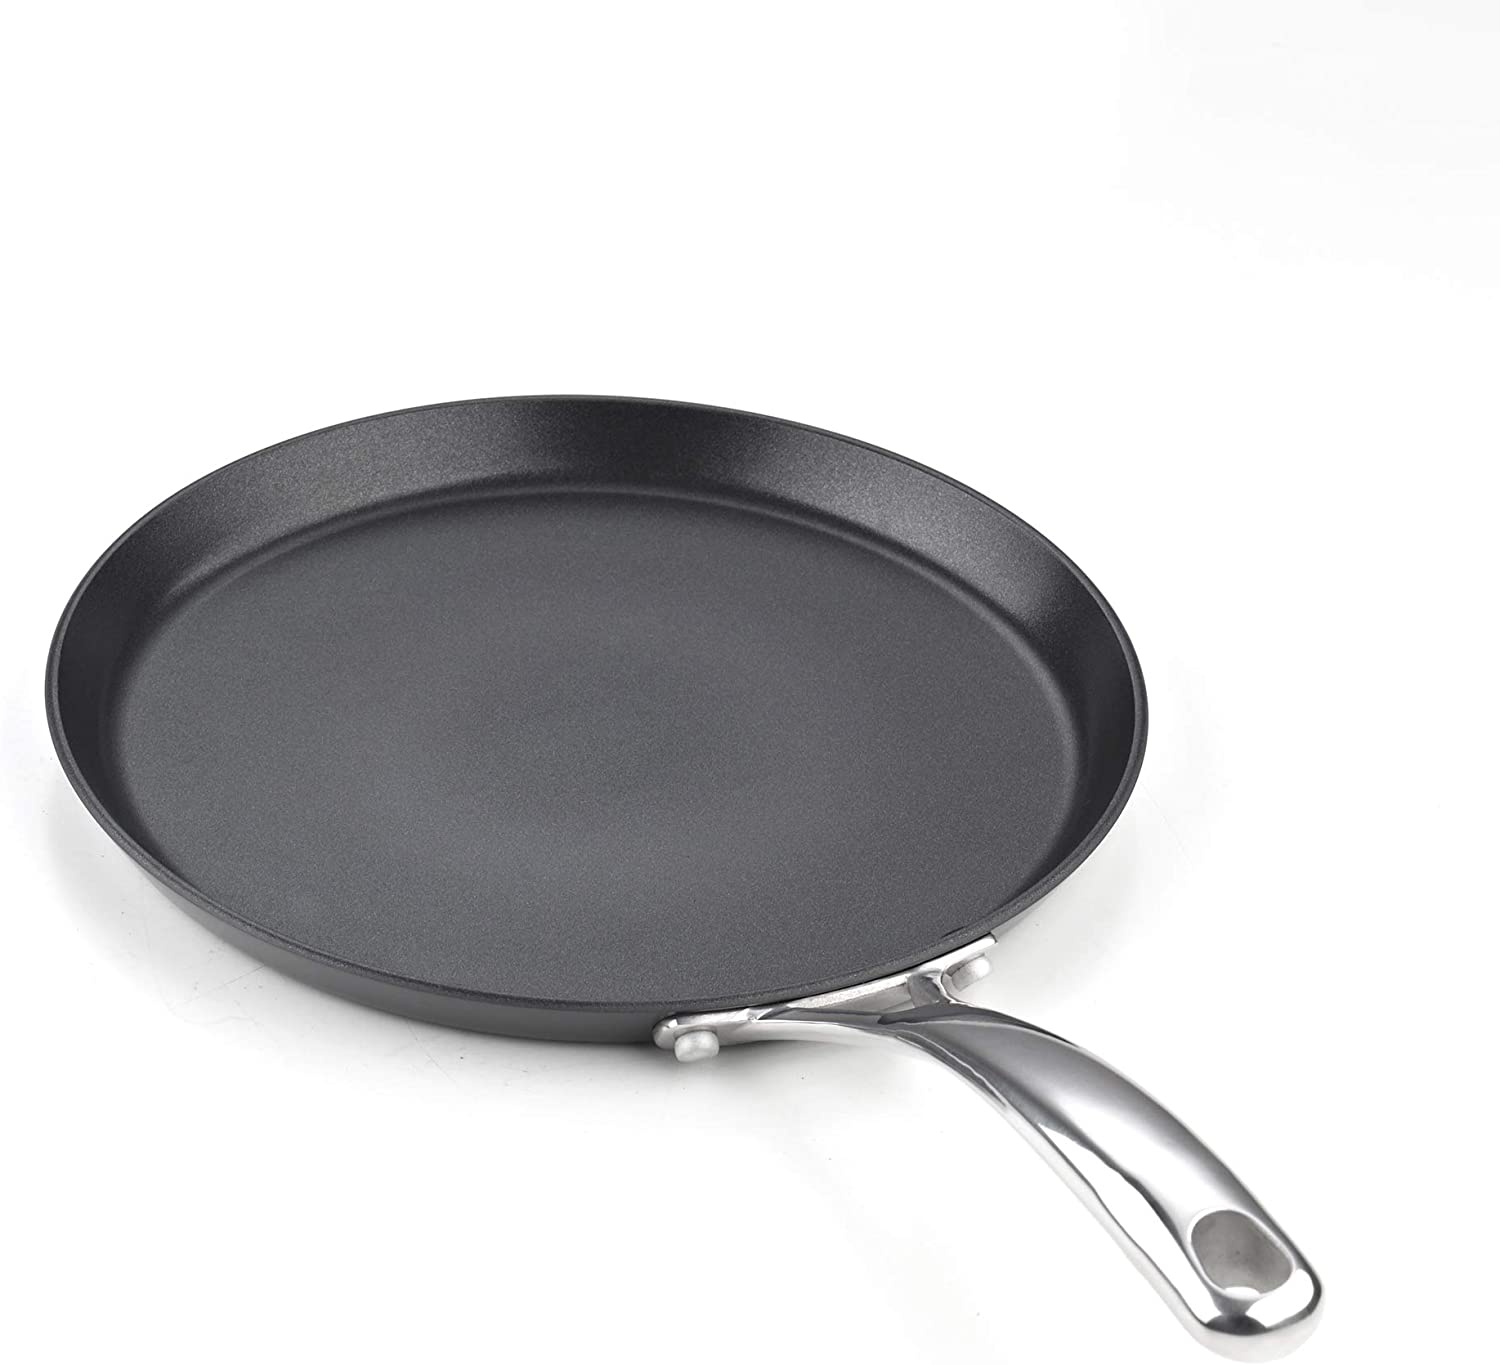  Cooks Standard Frying Omelet Pan, Classic Hard Anodized  Nonstick 12-Inch/30cm Saute Skillet Egg Pan, Black: Home & Kitchen